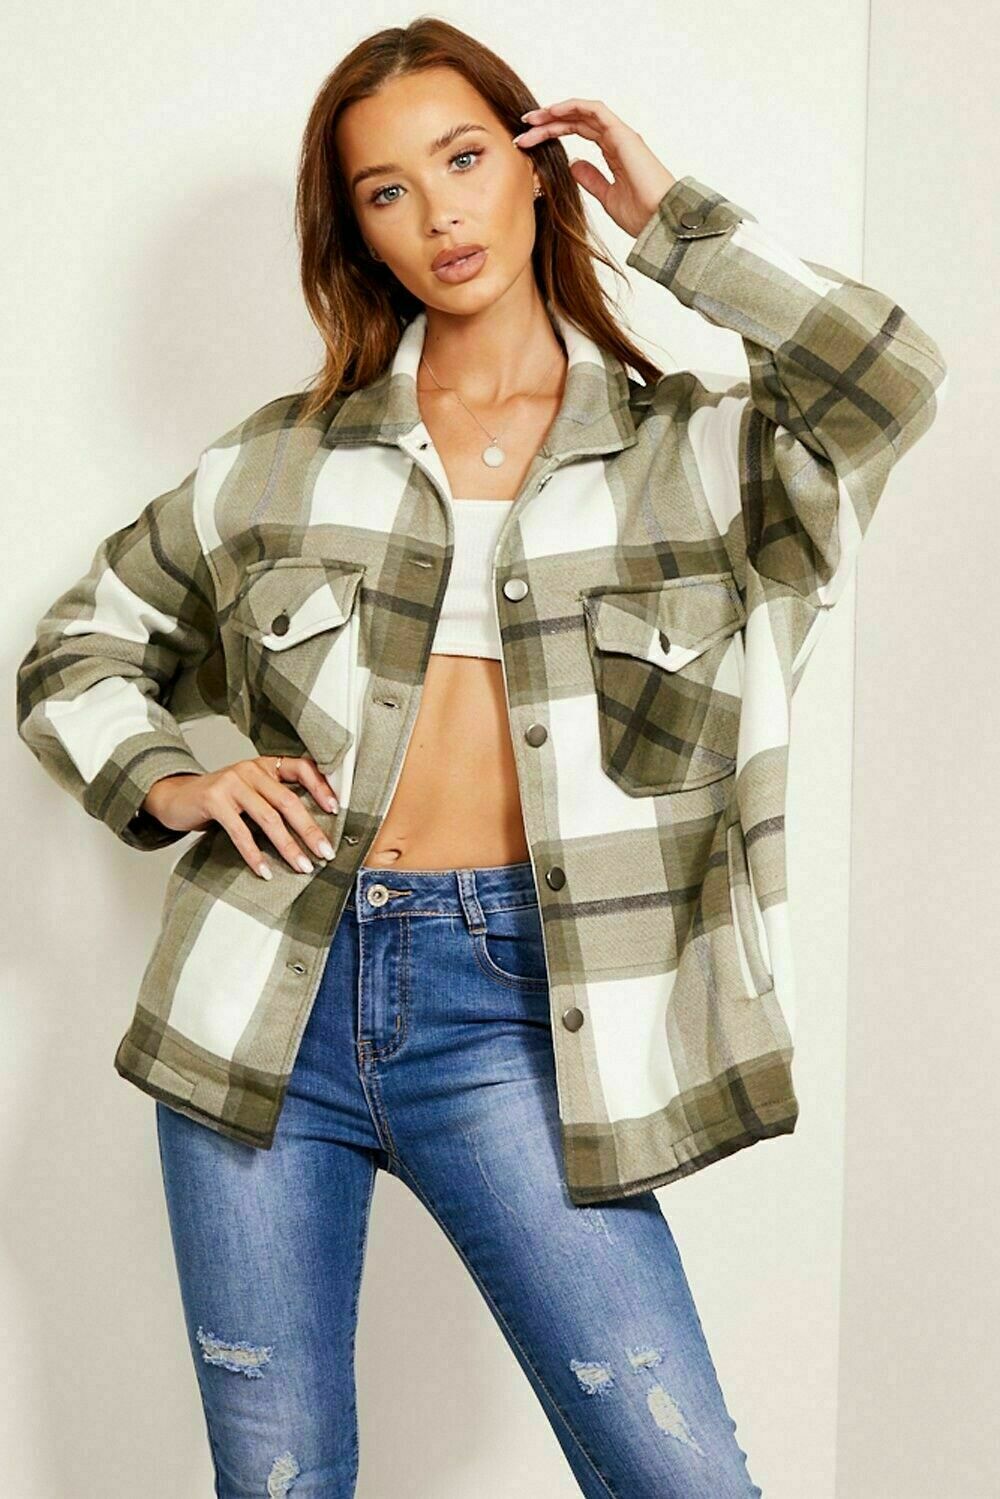 Ladies Oversized Shirt In A Khaki Check Design. Available In Sizes 4-8, 8-10, 12-14, 16-18. They Are Perfect To Wear Over A T-Shirt & Jeans As A Jacket.